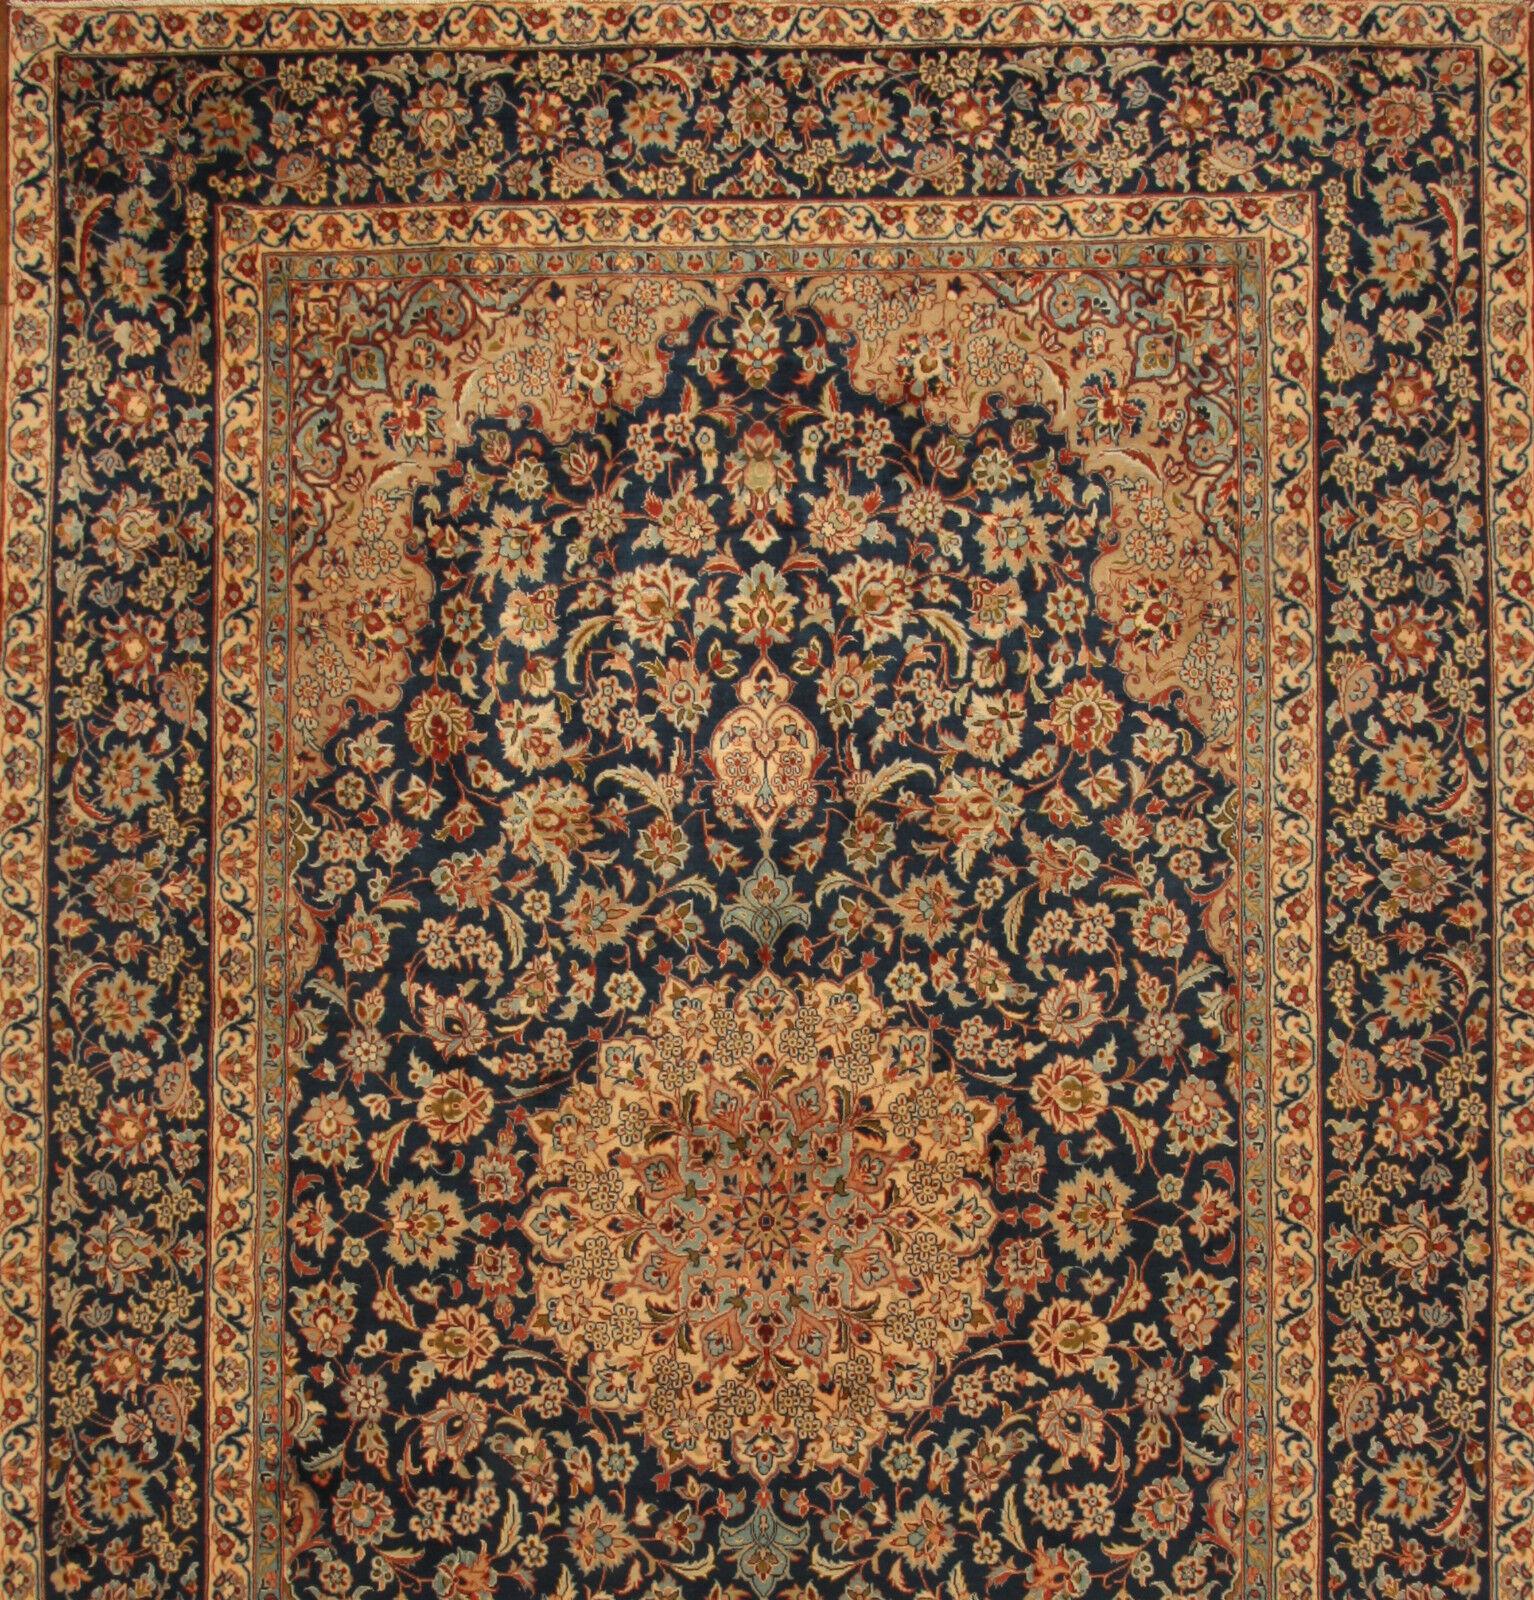 Handmade Vintage Persian Style Isfahan Rug 9.5' x 15', 1970s - 1T29 For Sale 5